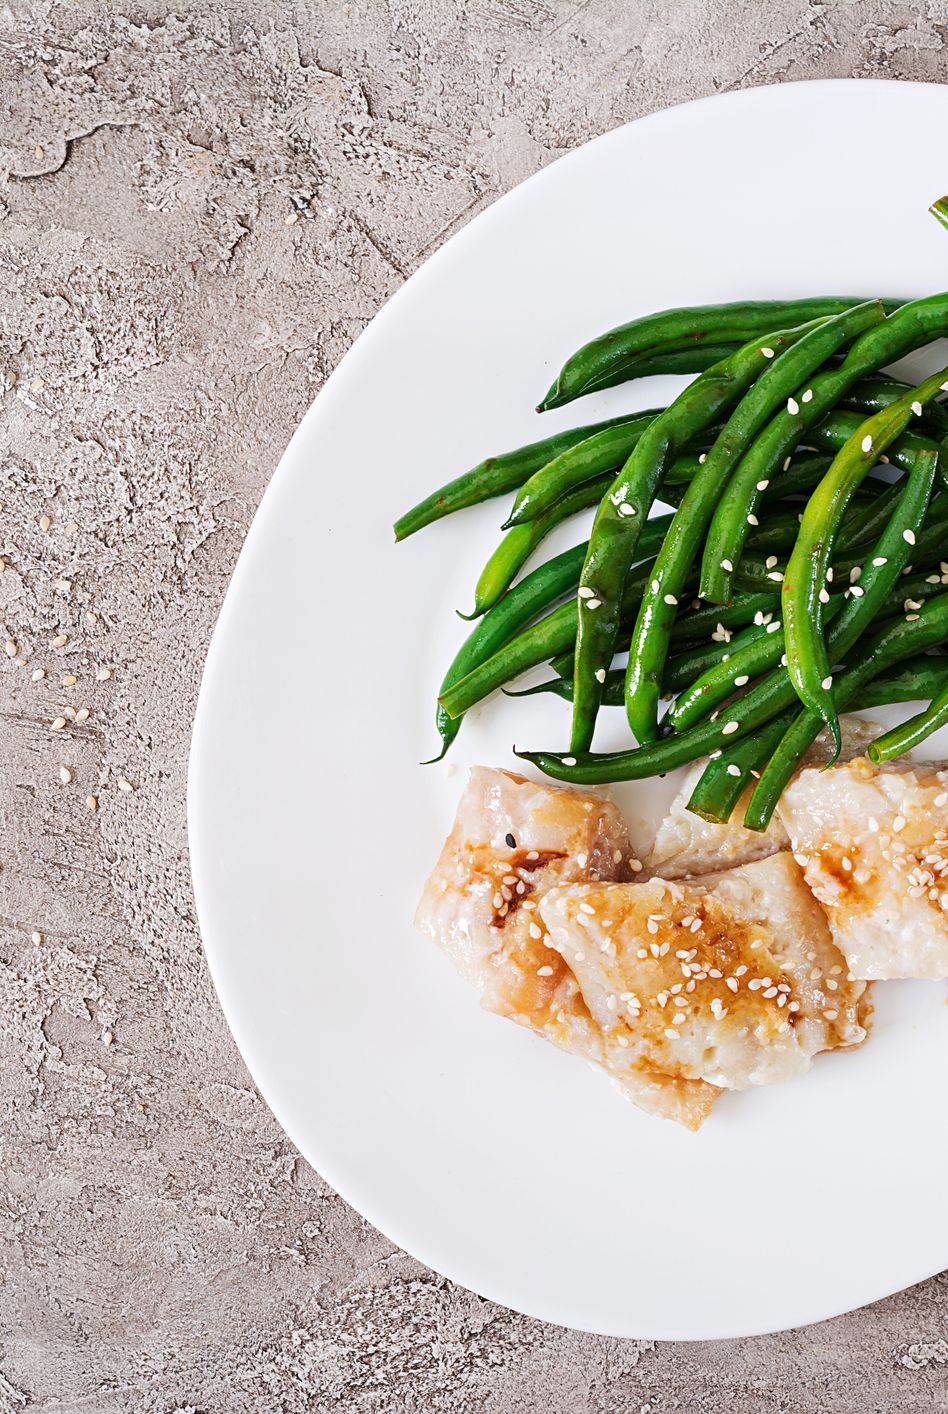 https://hips.hearstapps.com/hmg-prod/images/fish-fillet-served-with-soy-sauce-and-green-beans-royalty-free-image-1598389568.jpg?crop=0.447xw:1.00xh;0.420xw,0&resize=980:*